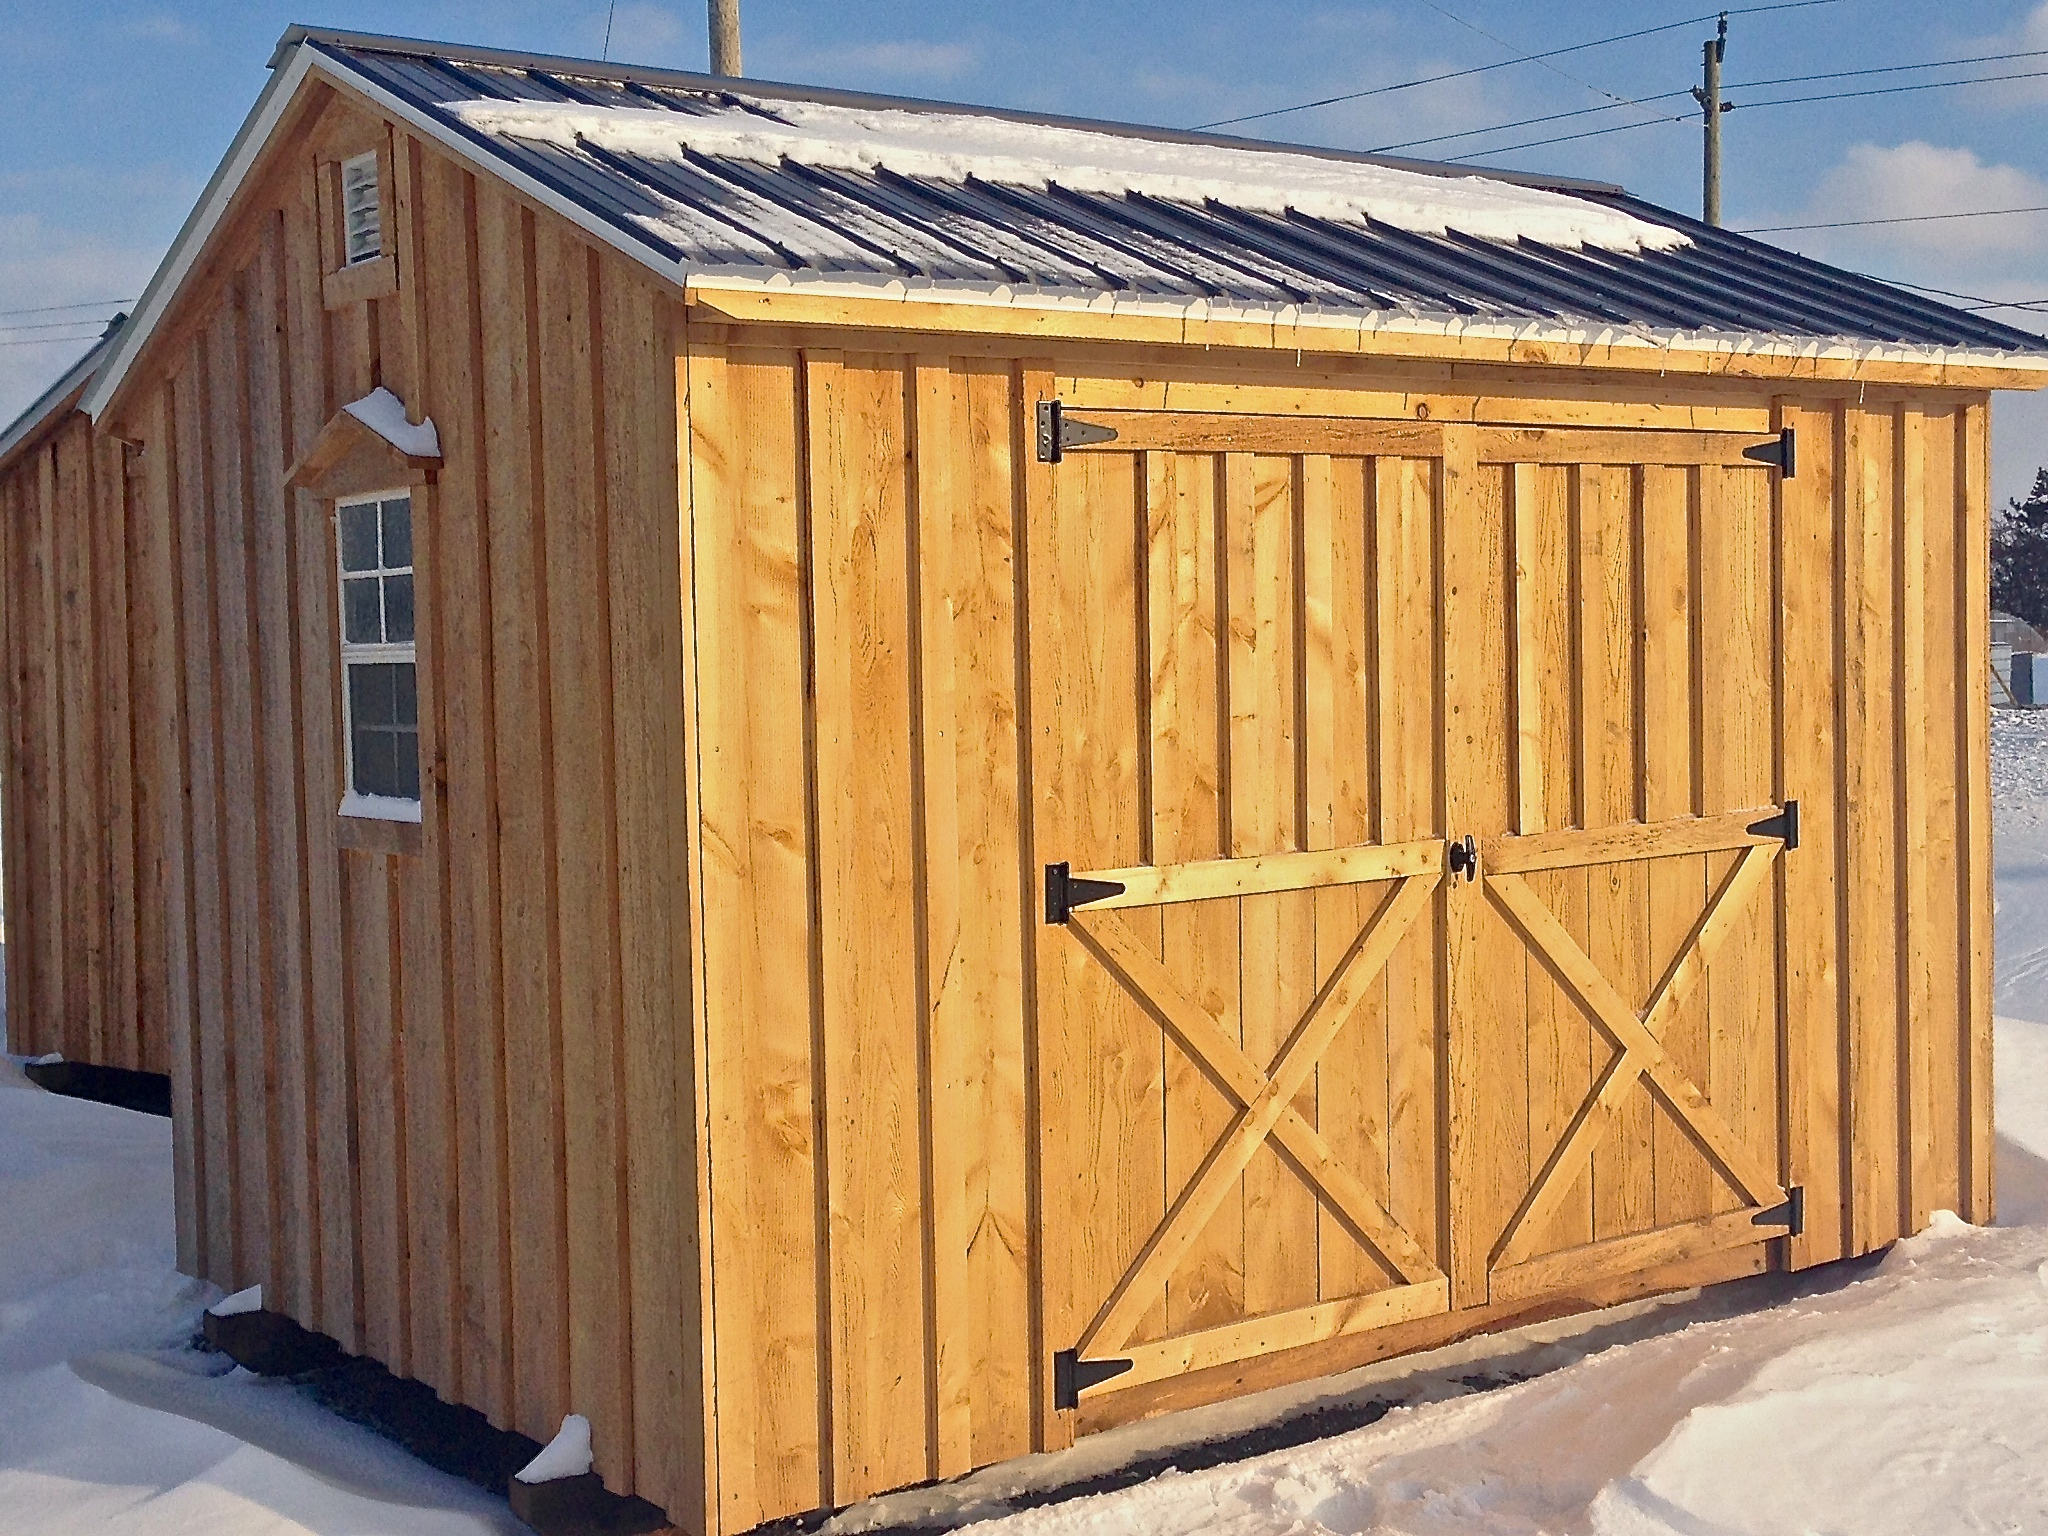 Amish Shed With Double Doors